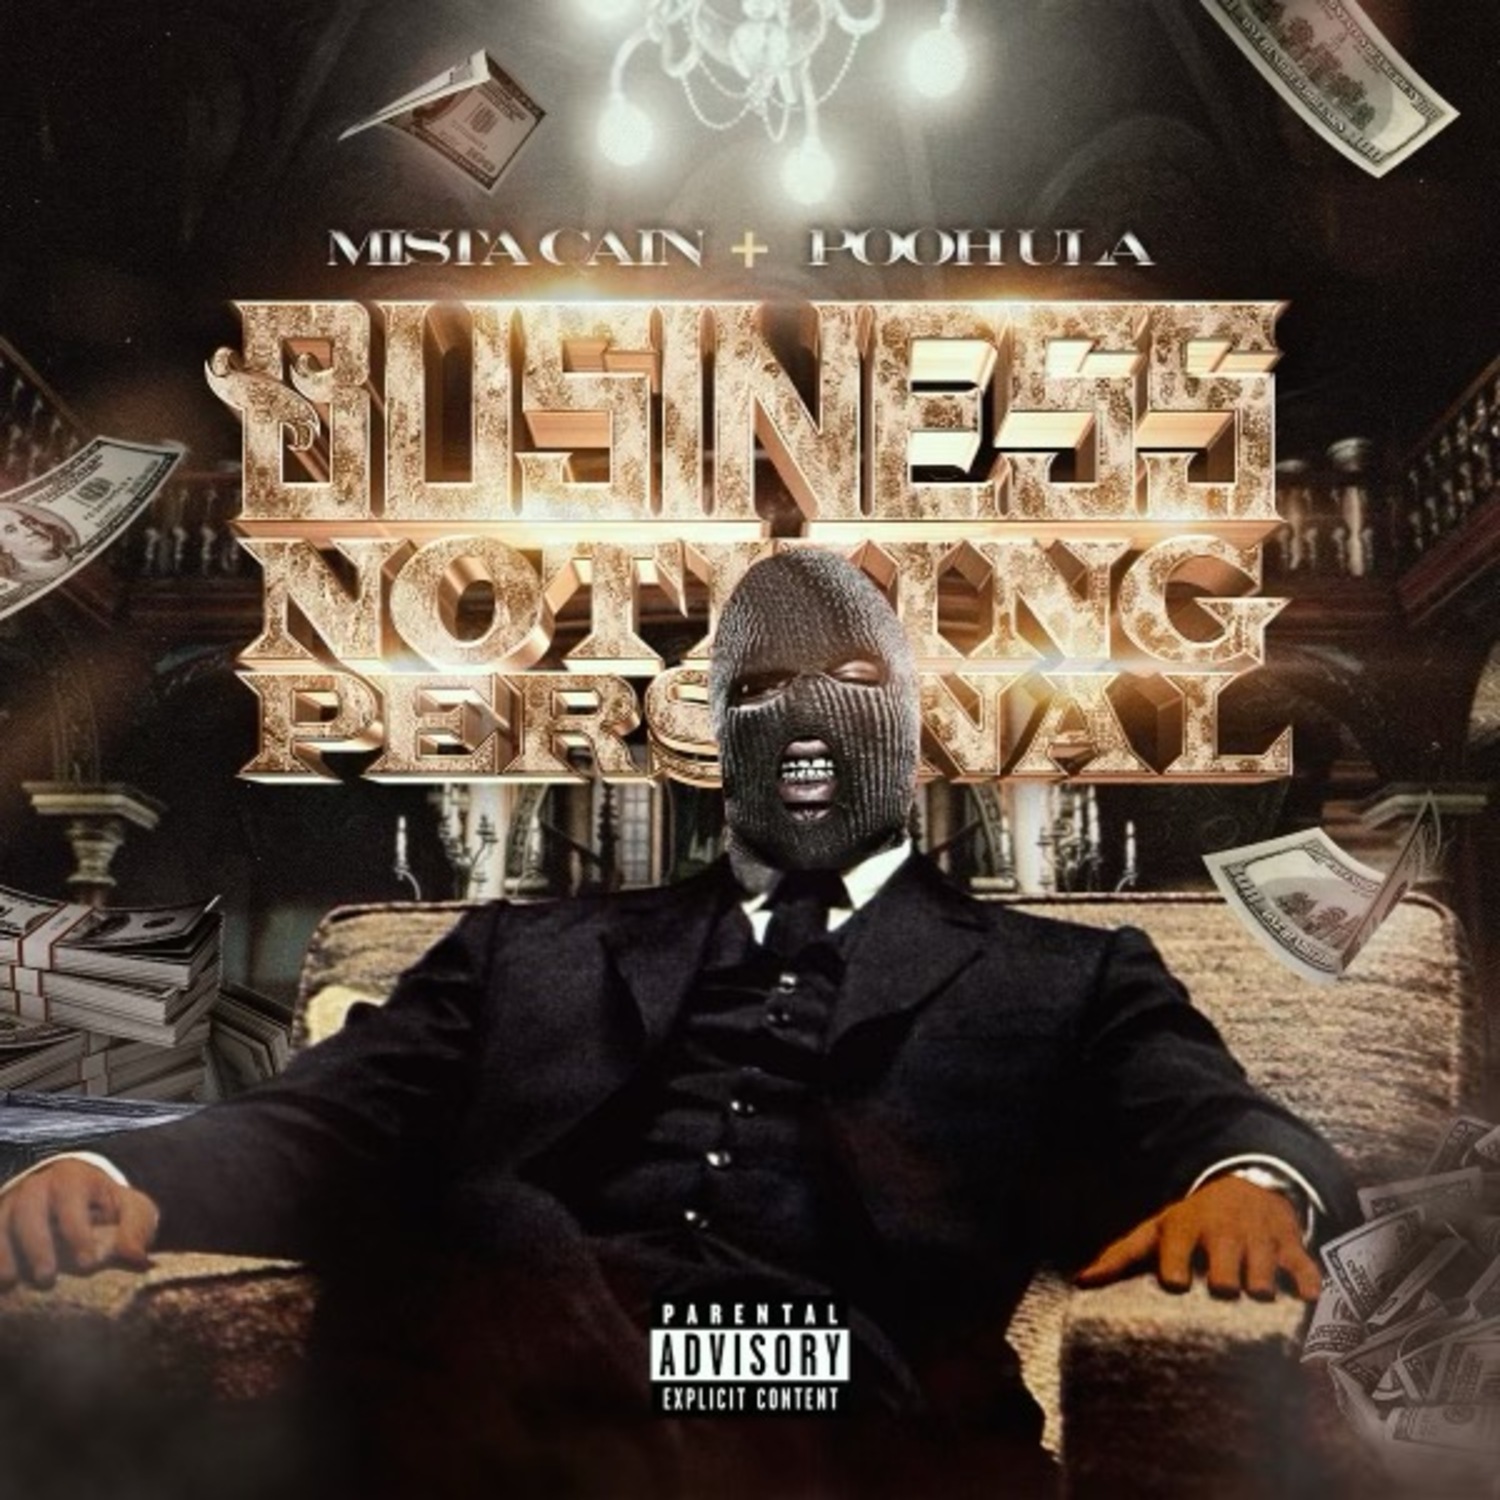 Mista Cain & Poohula - Business Nothing Personal EP Cover Art